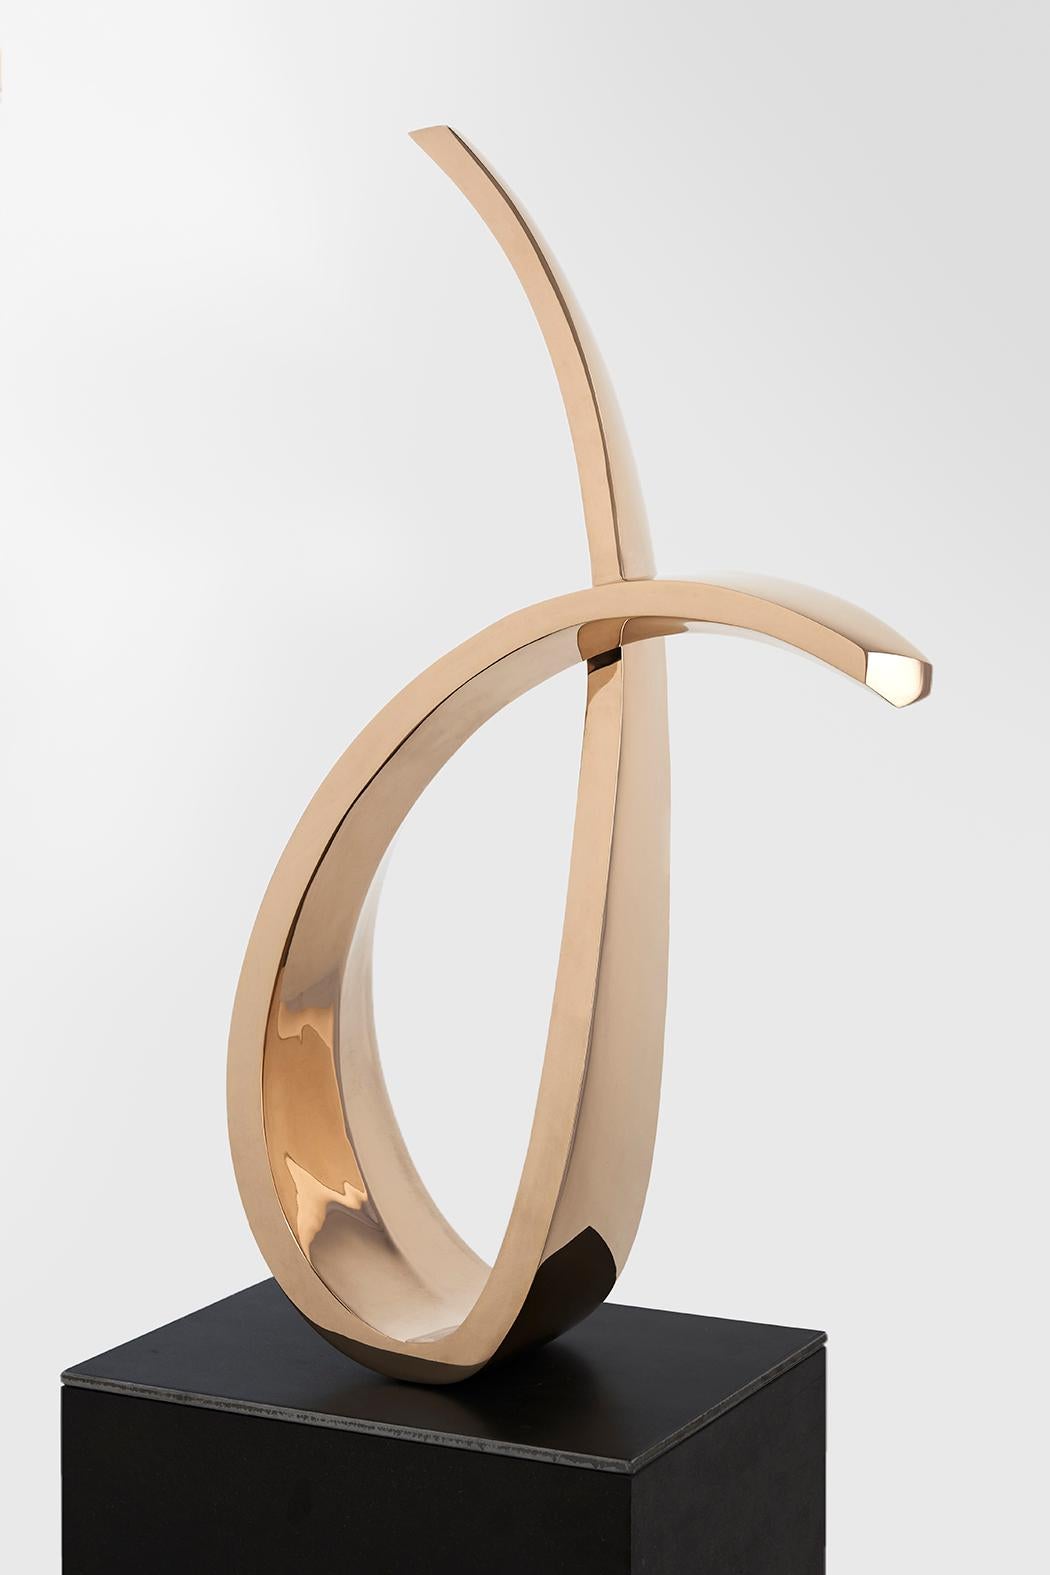 Bronze Sculpture 'O.T. VIII' by Carola Eggeling
Abstract sculpture with beautiful curved lines.

German bronze sculpture
Bronze Polished 
Numbered and signed artwork
Limited edition of 6
Measures: H. 67 x 47 x 17 cm

Eggeling's are pure forms, the